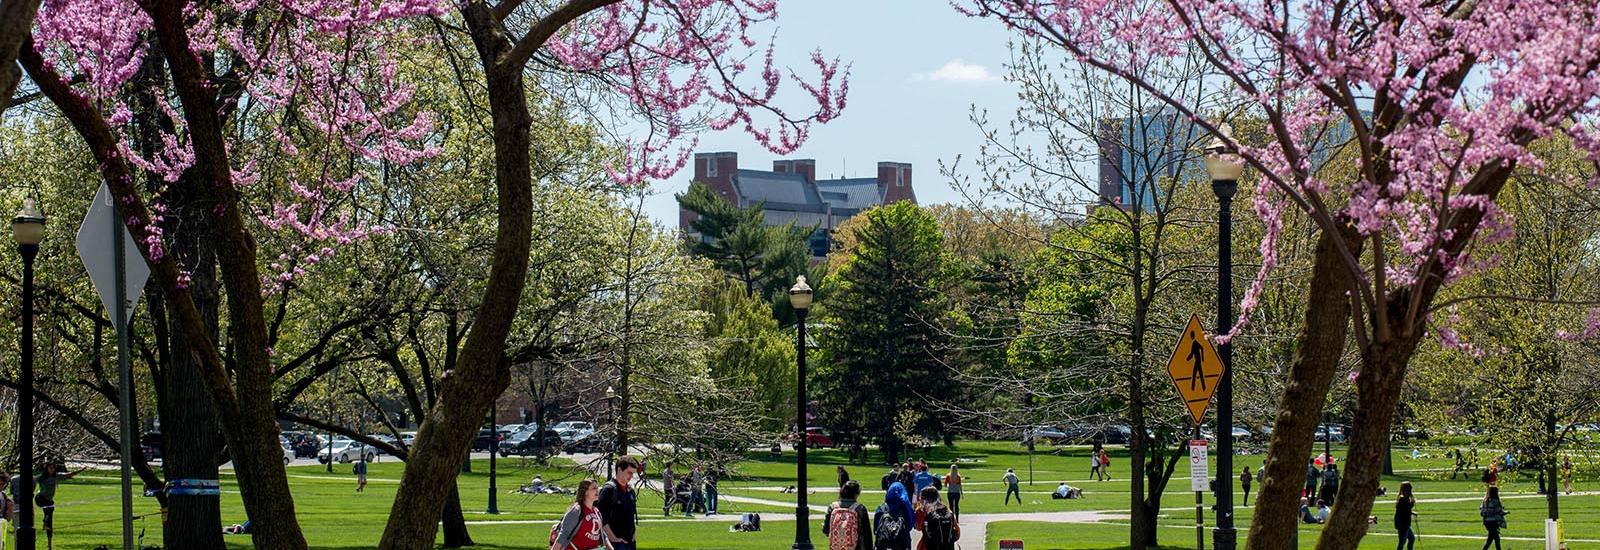 Ohio State Oval in Spring